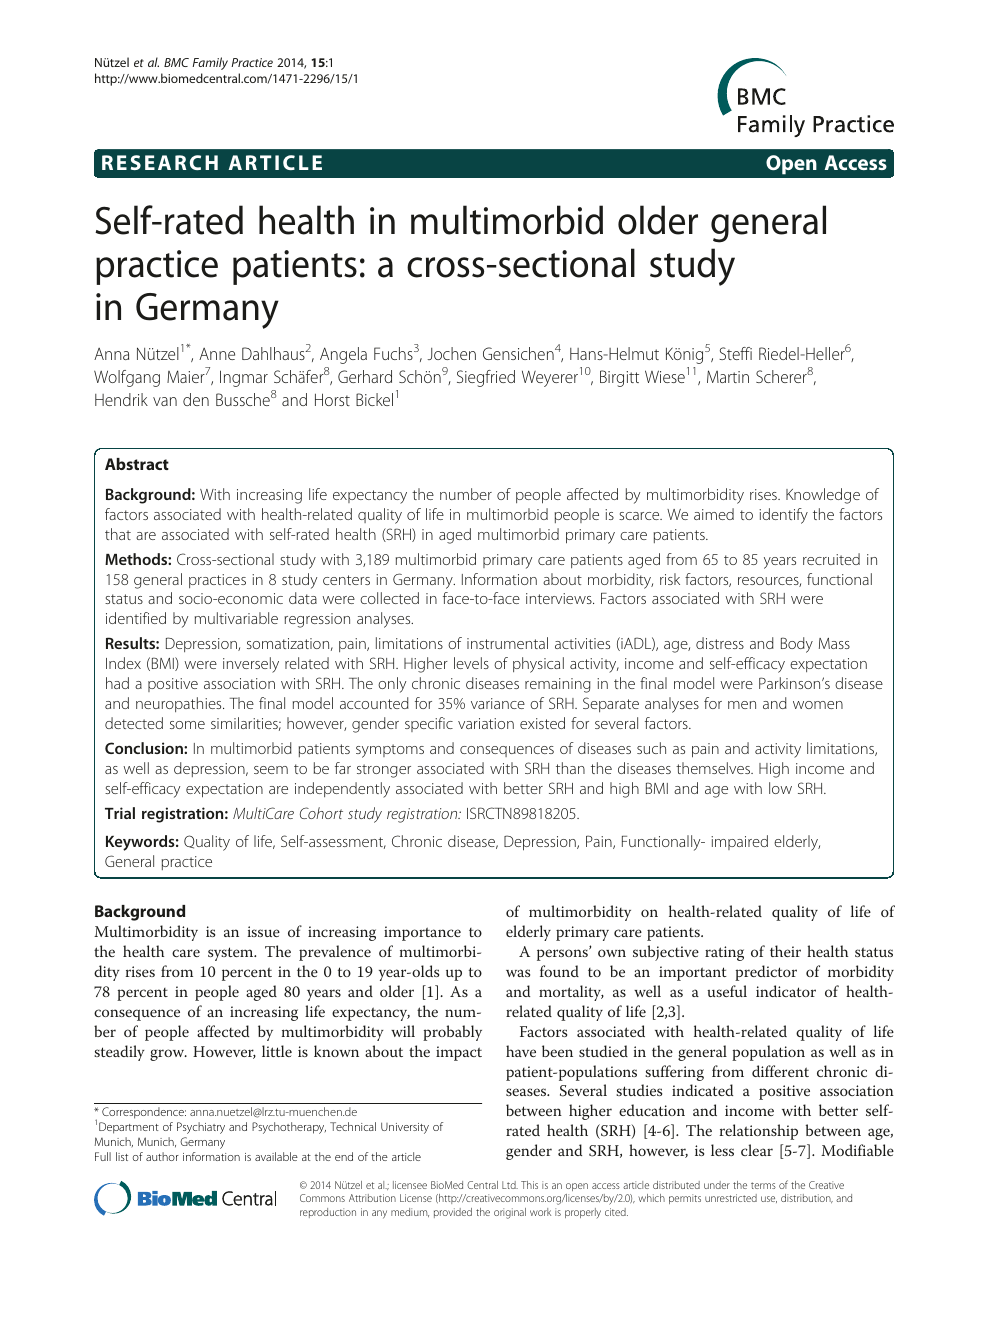 Does social support mediate the effect of multimorbidity on mental